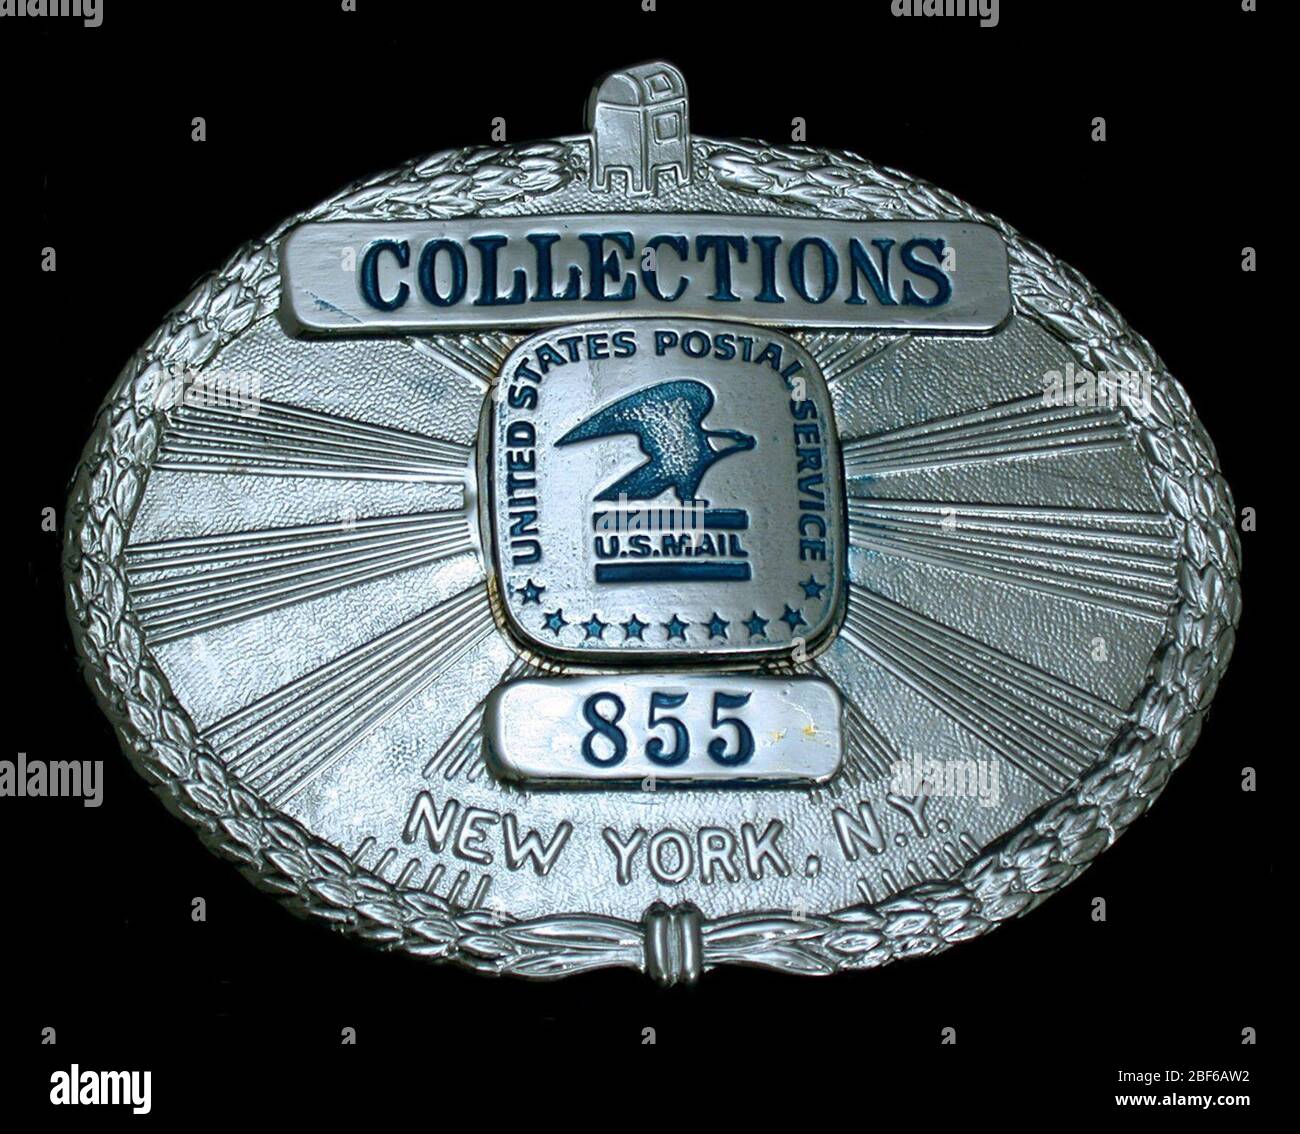 Collections Service Employee Chest Badge Number 855. United States Post Office Department Collections Service badge, number 855, with eagle emblem in center emanating rays; laurel wreath around the perimeter with street letterbox on top center. Stock Photo